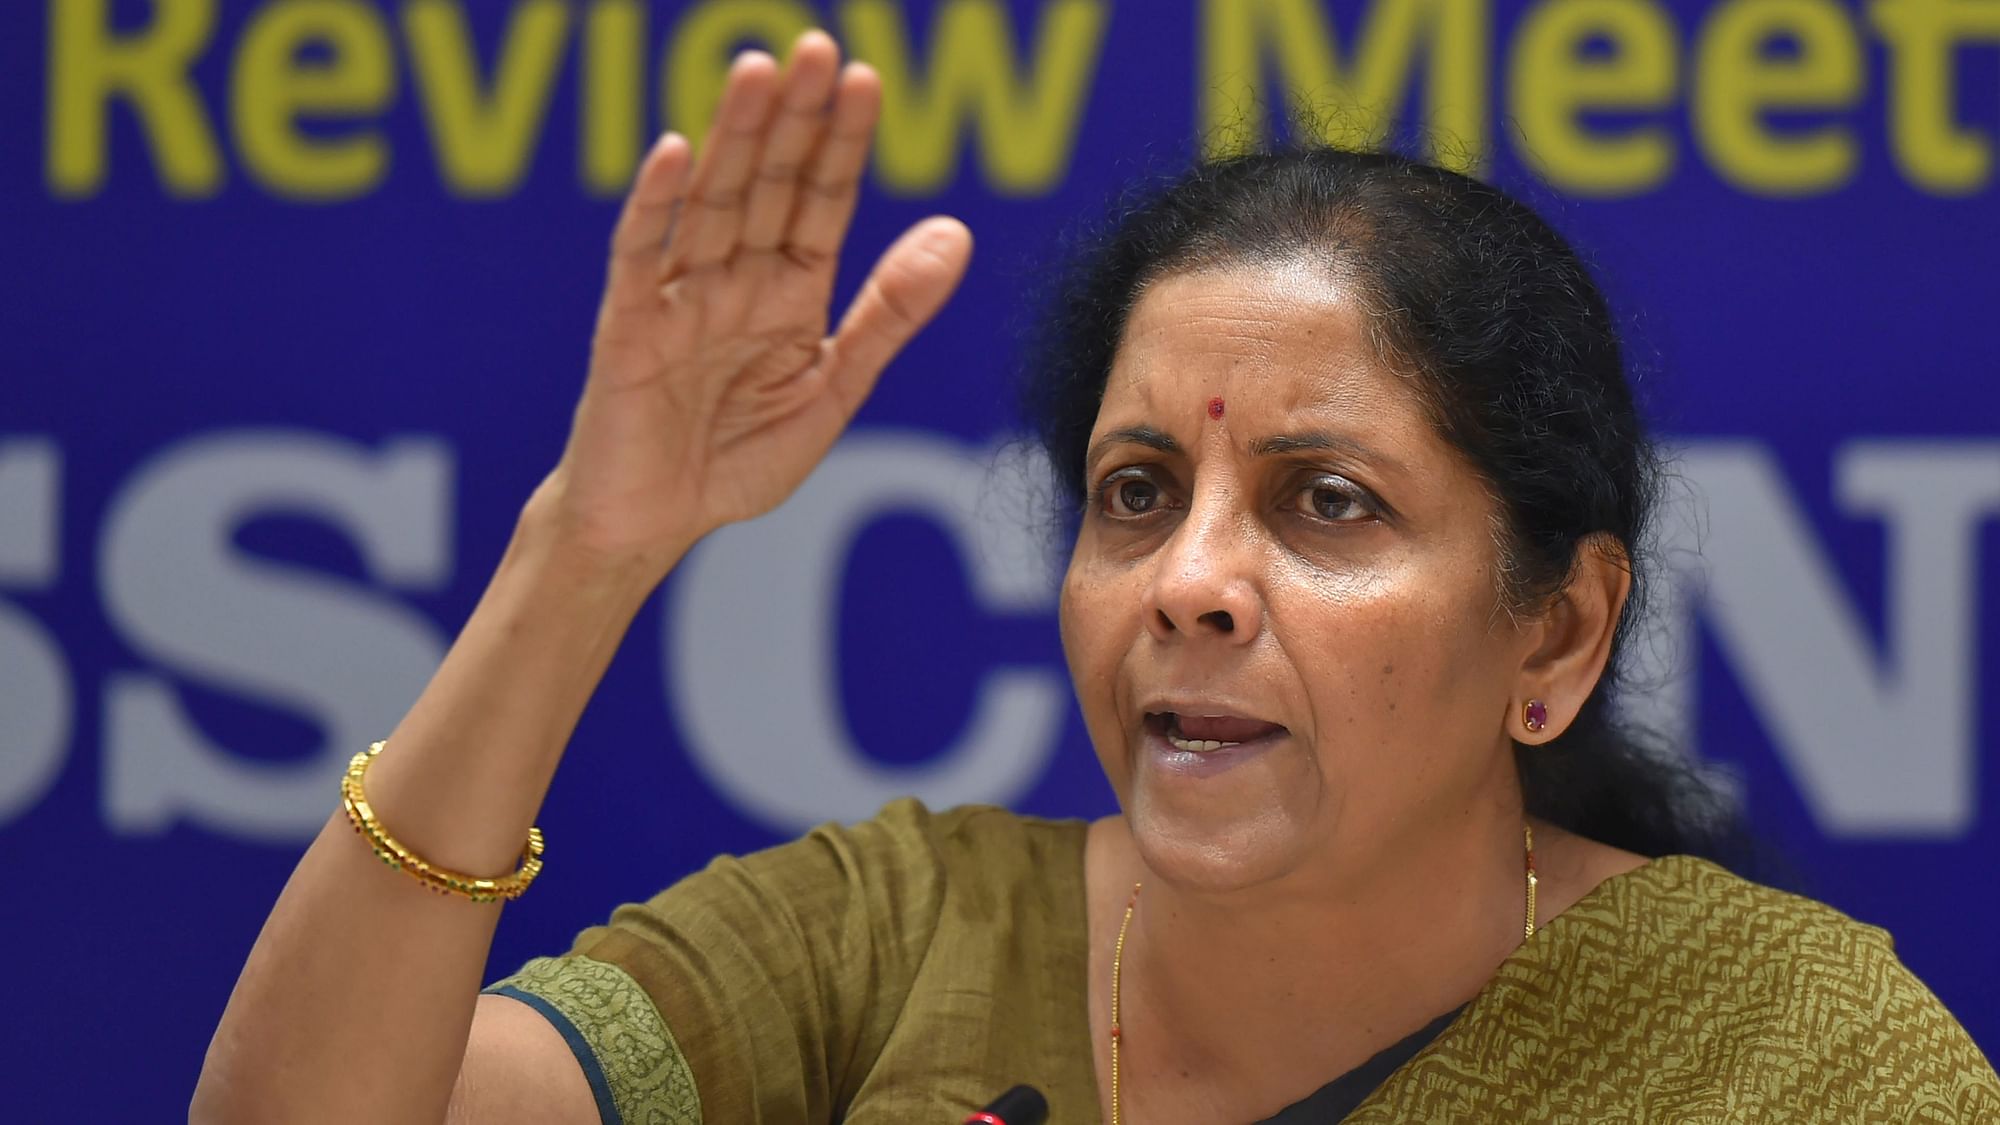 The GST Council, headed by Nirmala Sitharaman, held its 37th meeting in Goa on Friday.